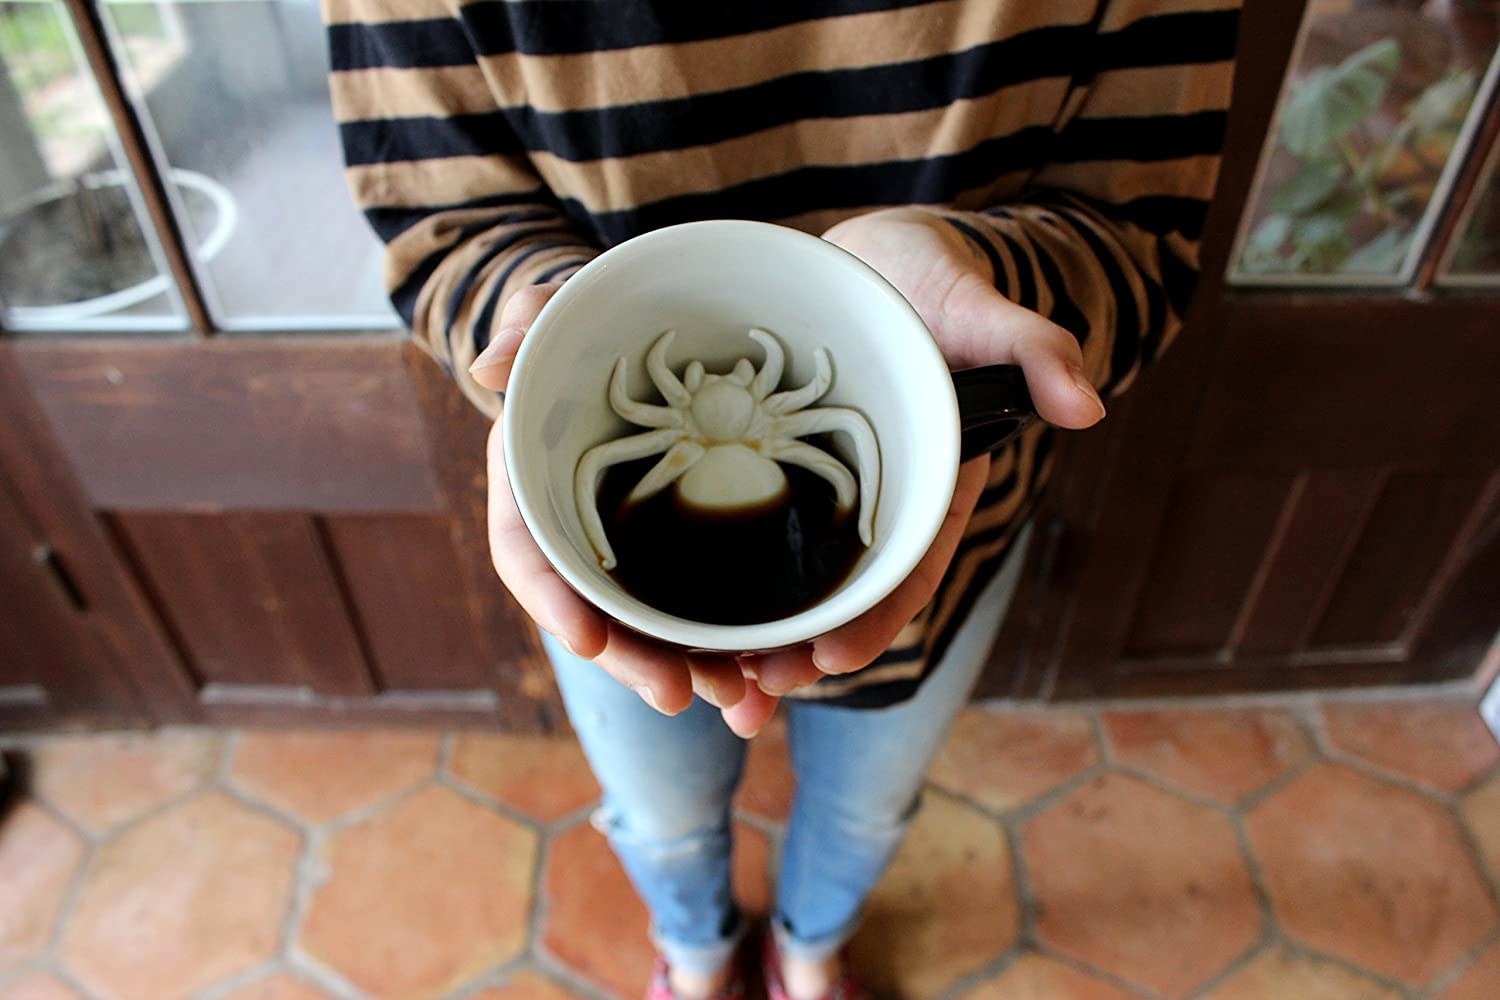 A person holding a mug with a spider revealed under their coffee